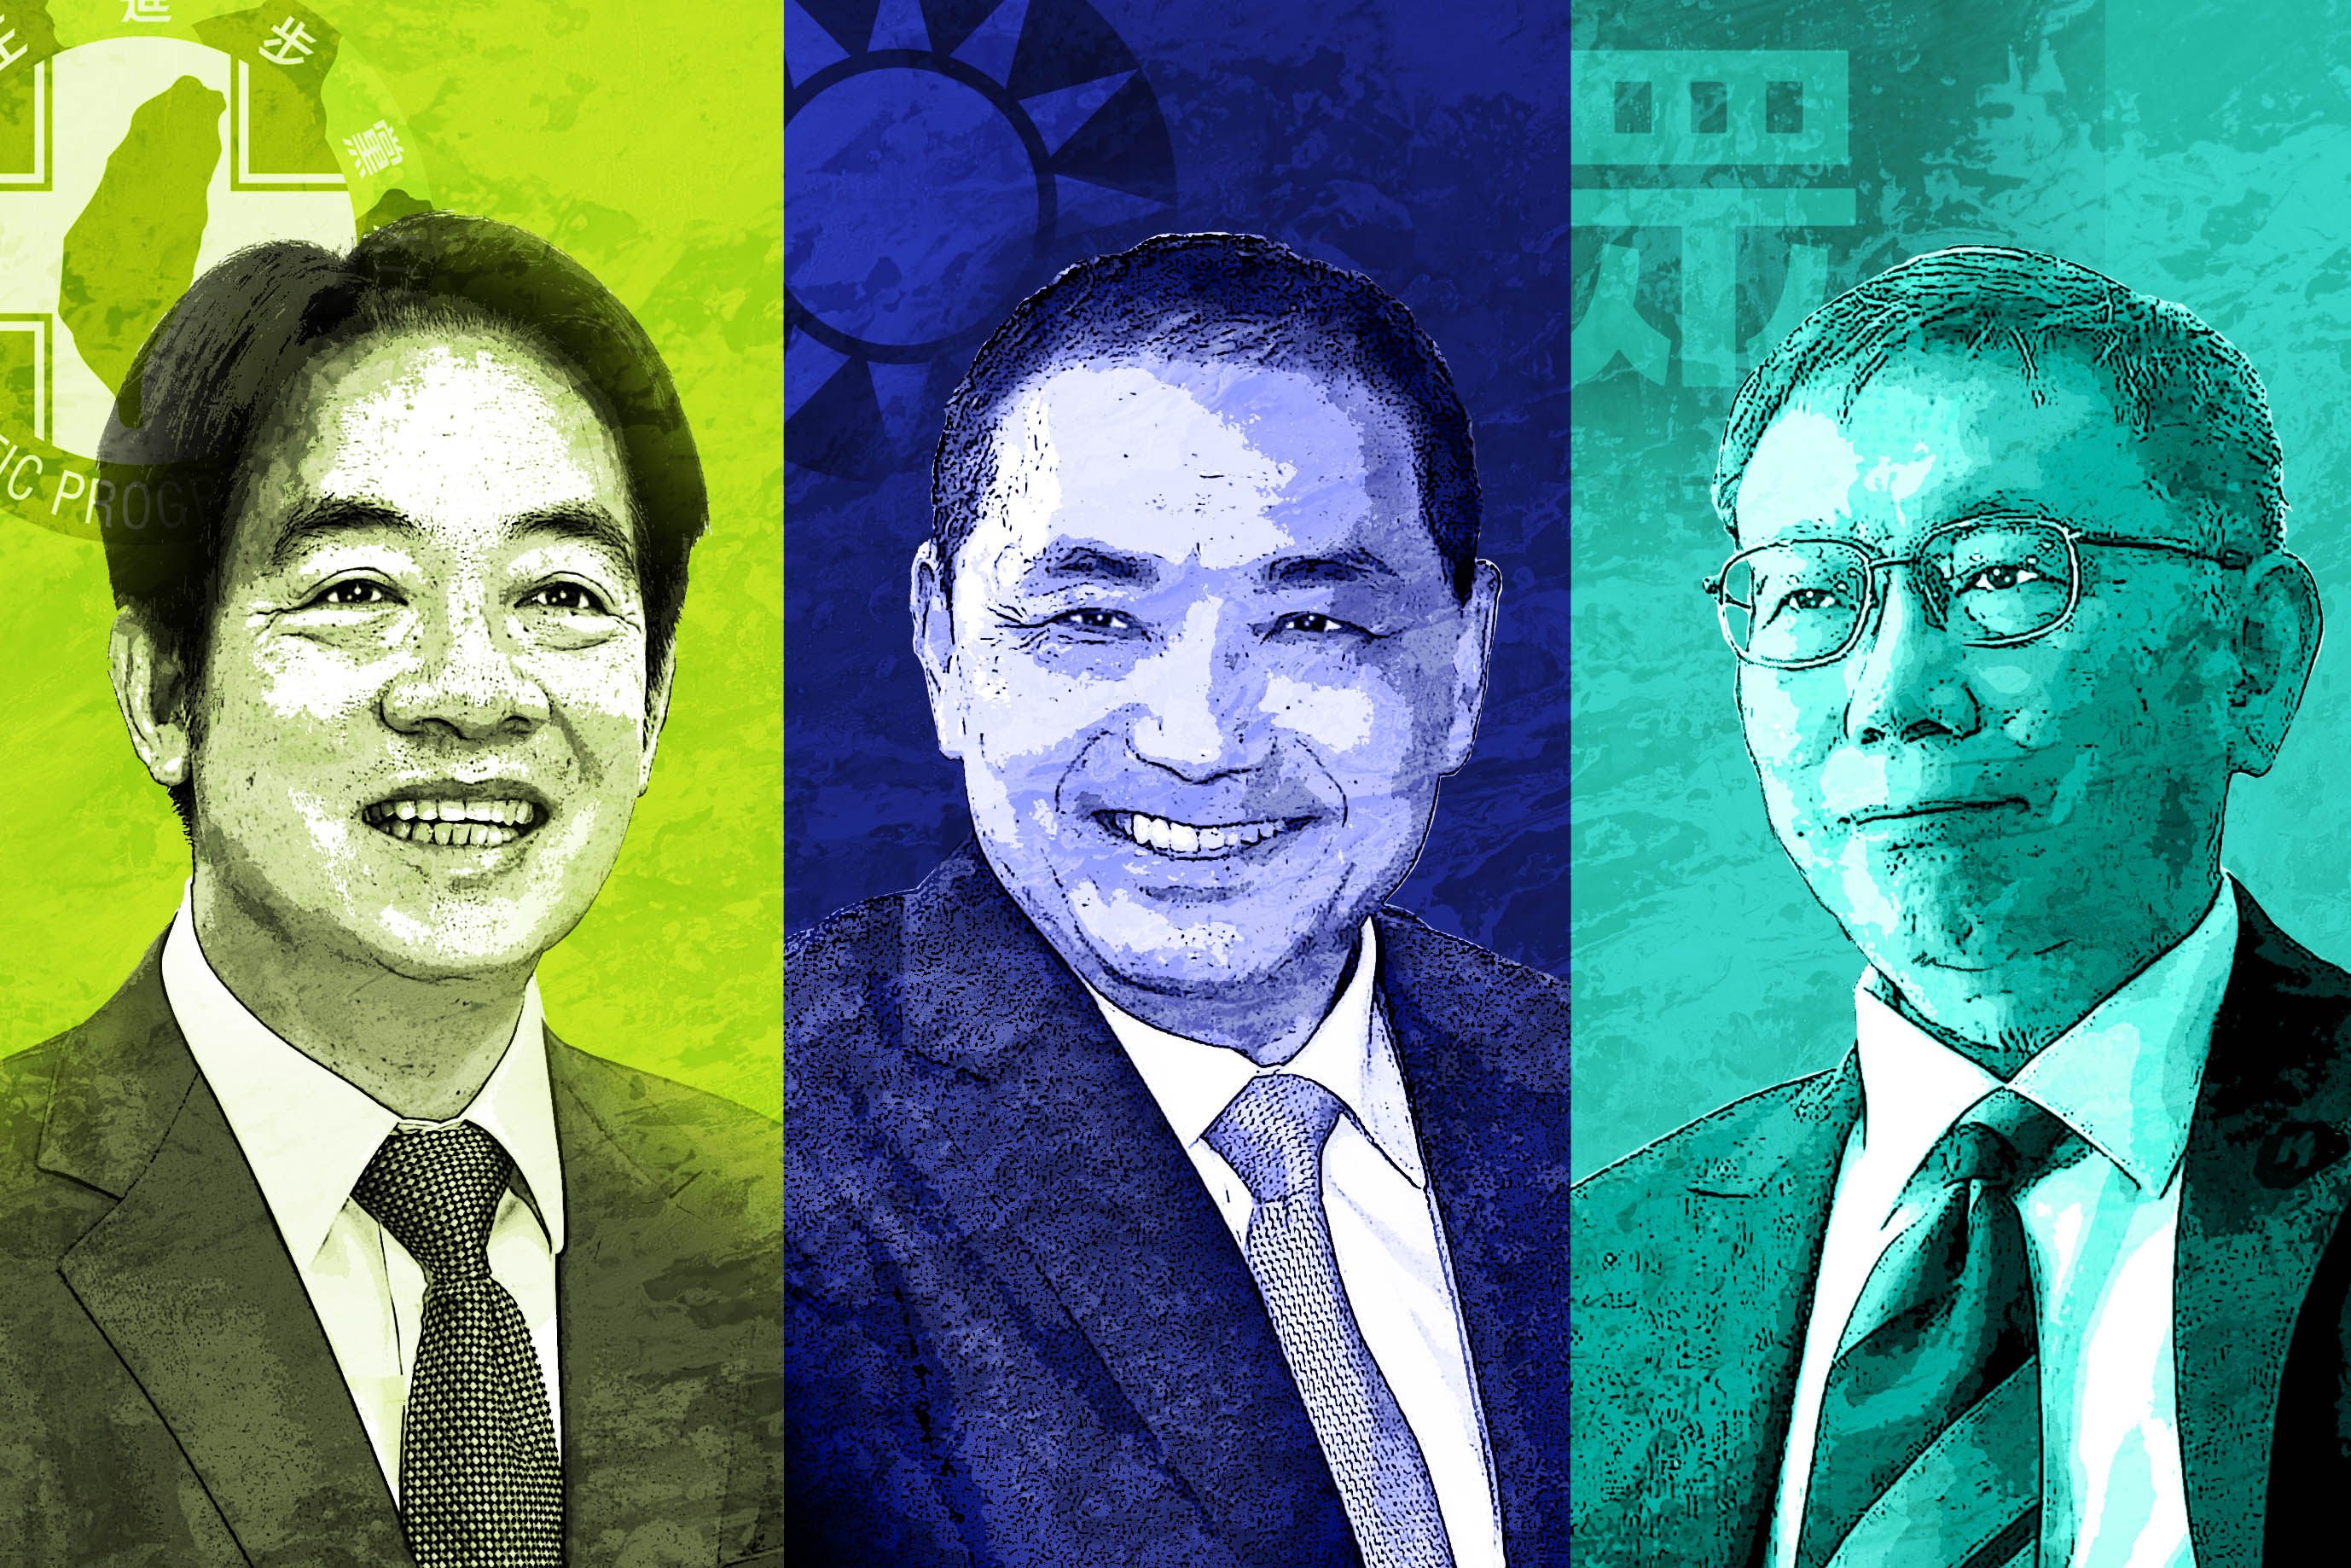 The DPP’s William Lai, Hou Yu-ih from the Kuomintang and Ko Wen-je from the Taiwan People’s Party are vying for the presidency. Illustration: Henry Wong